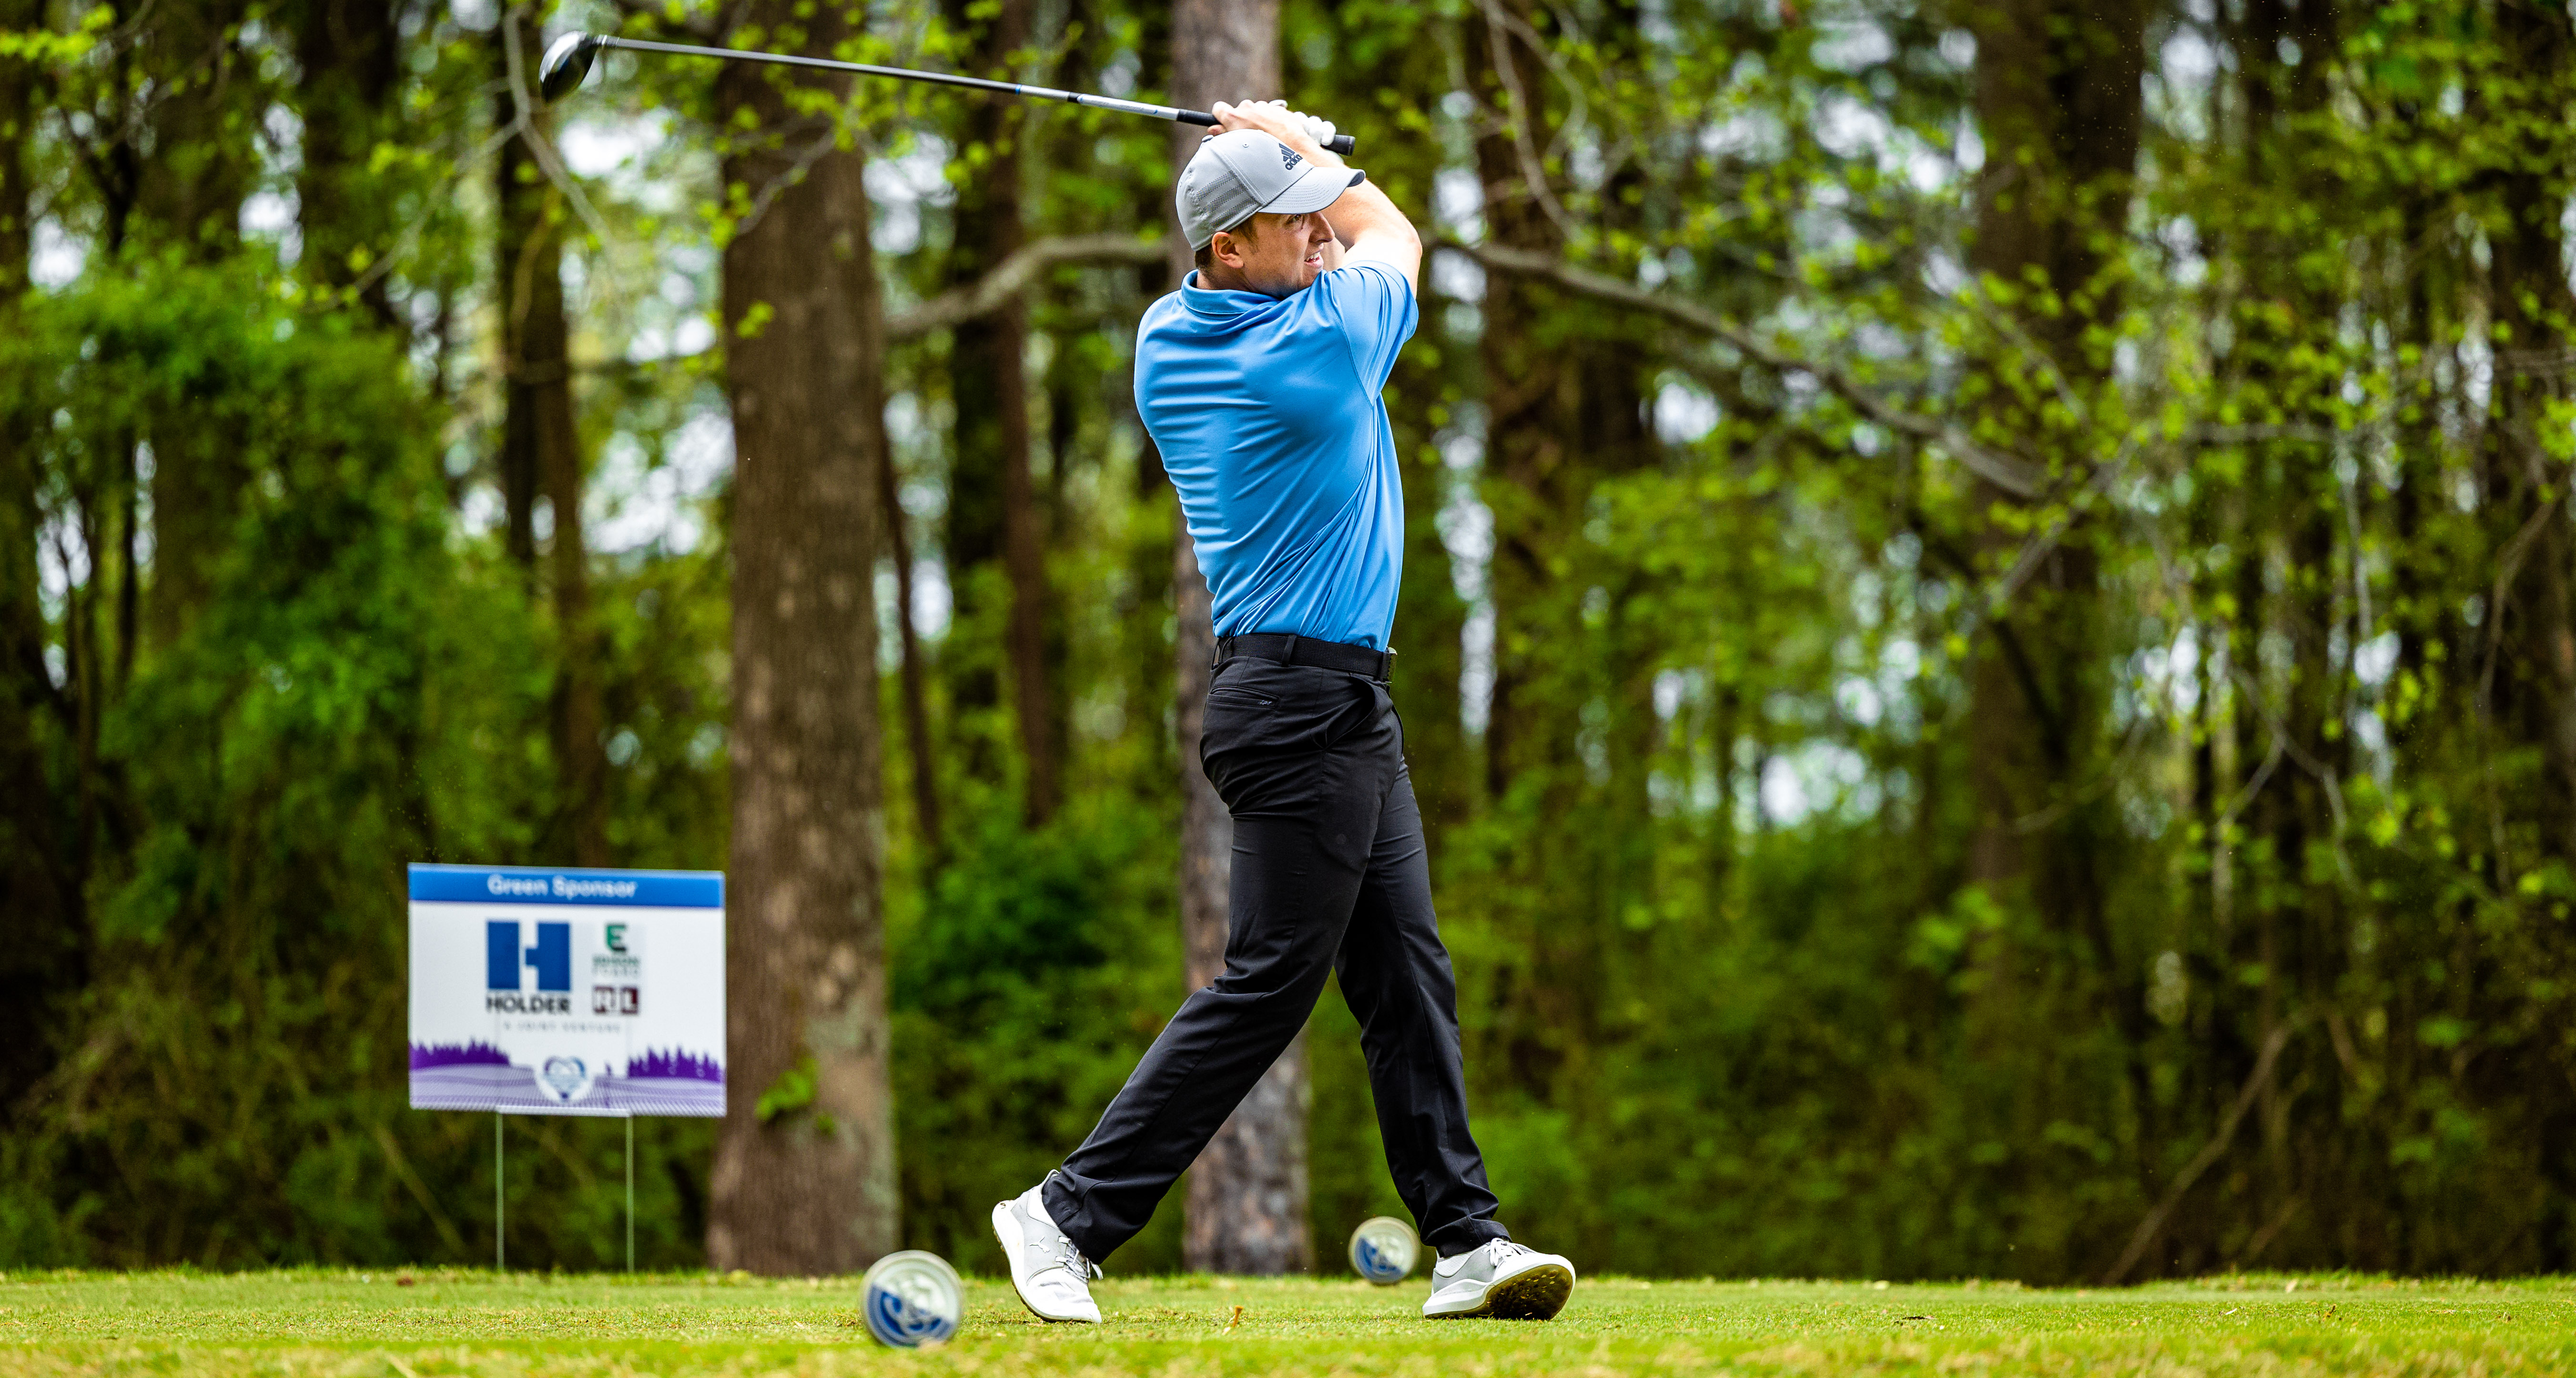 Golfer in full body swing motion, wearing blue shirt and black pants, green woods in the background